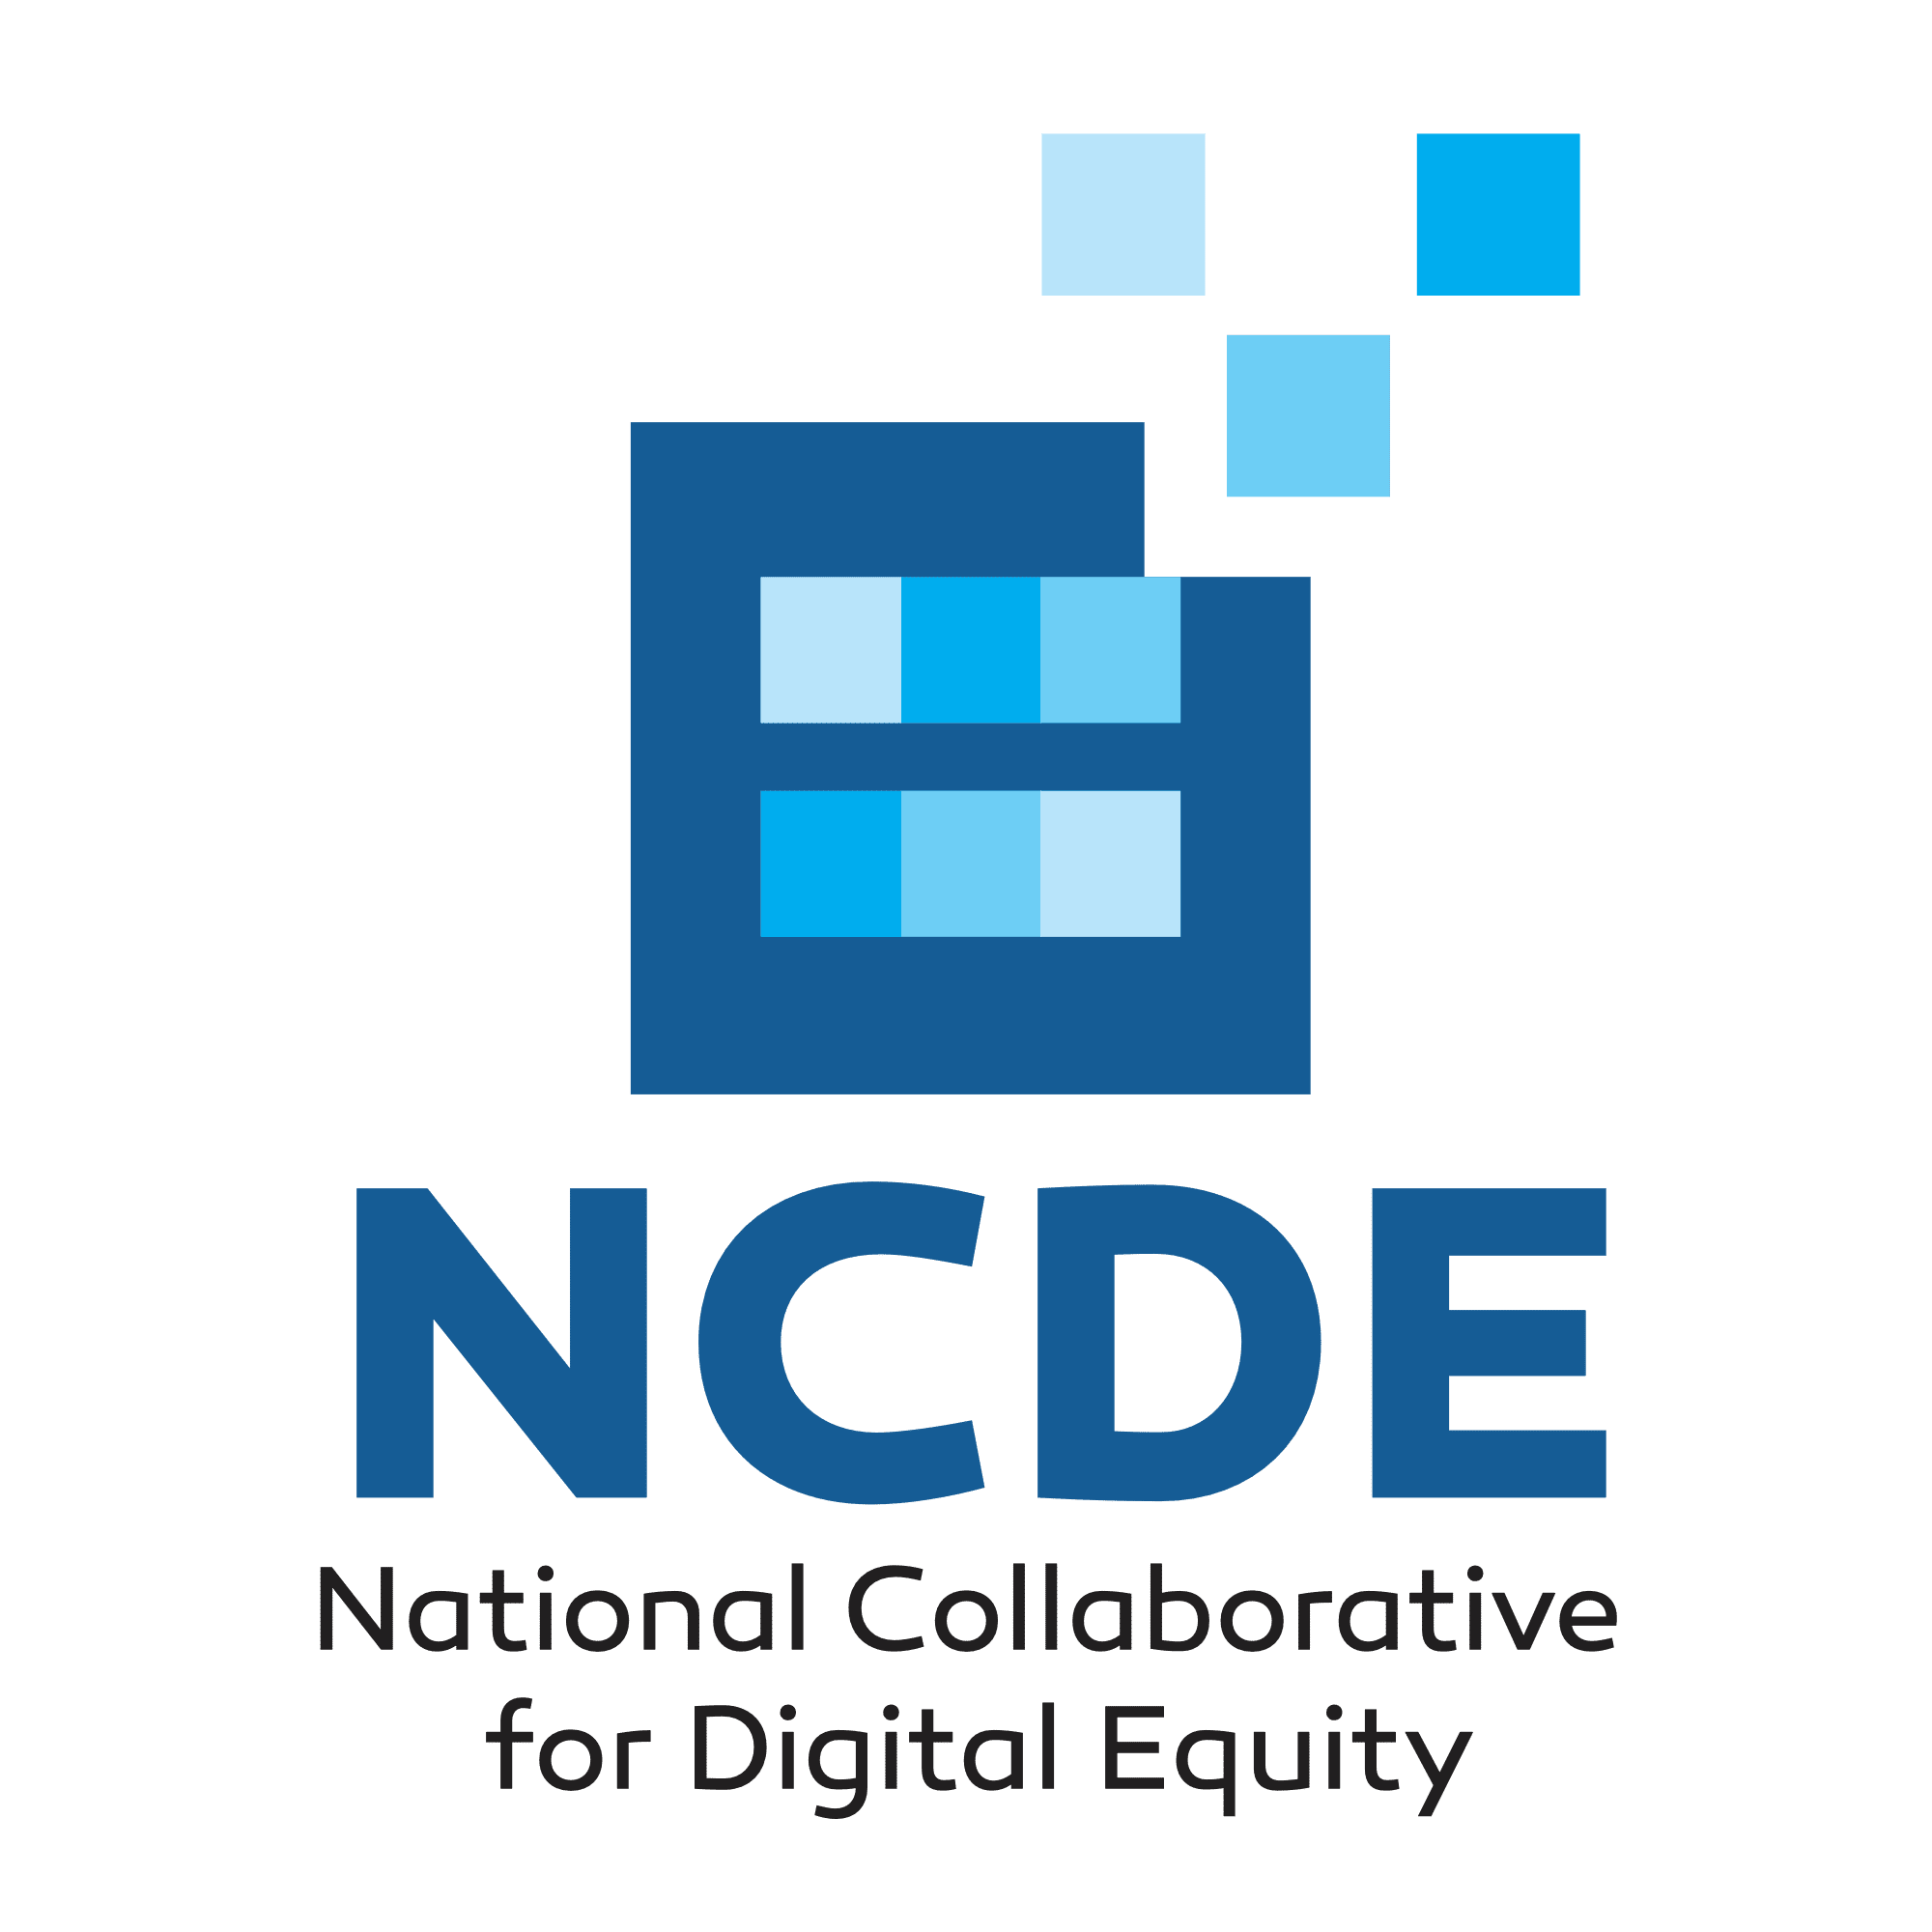 NCDE: National Collaborative for Digital Equity